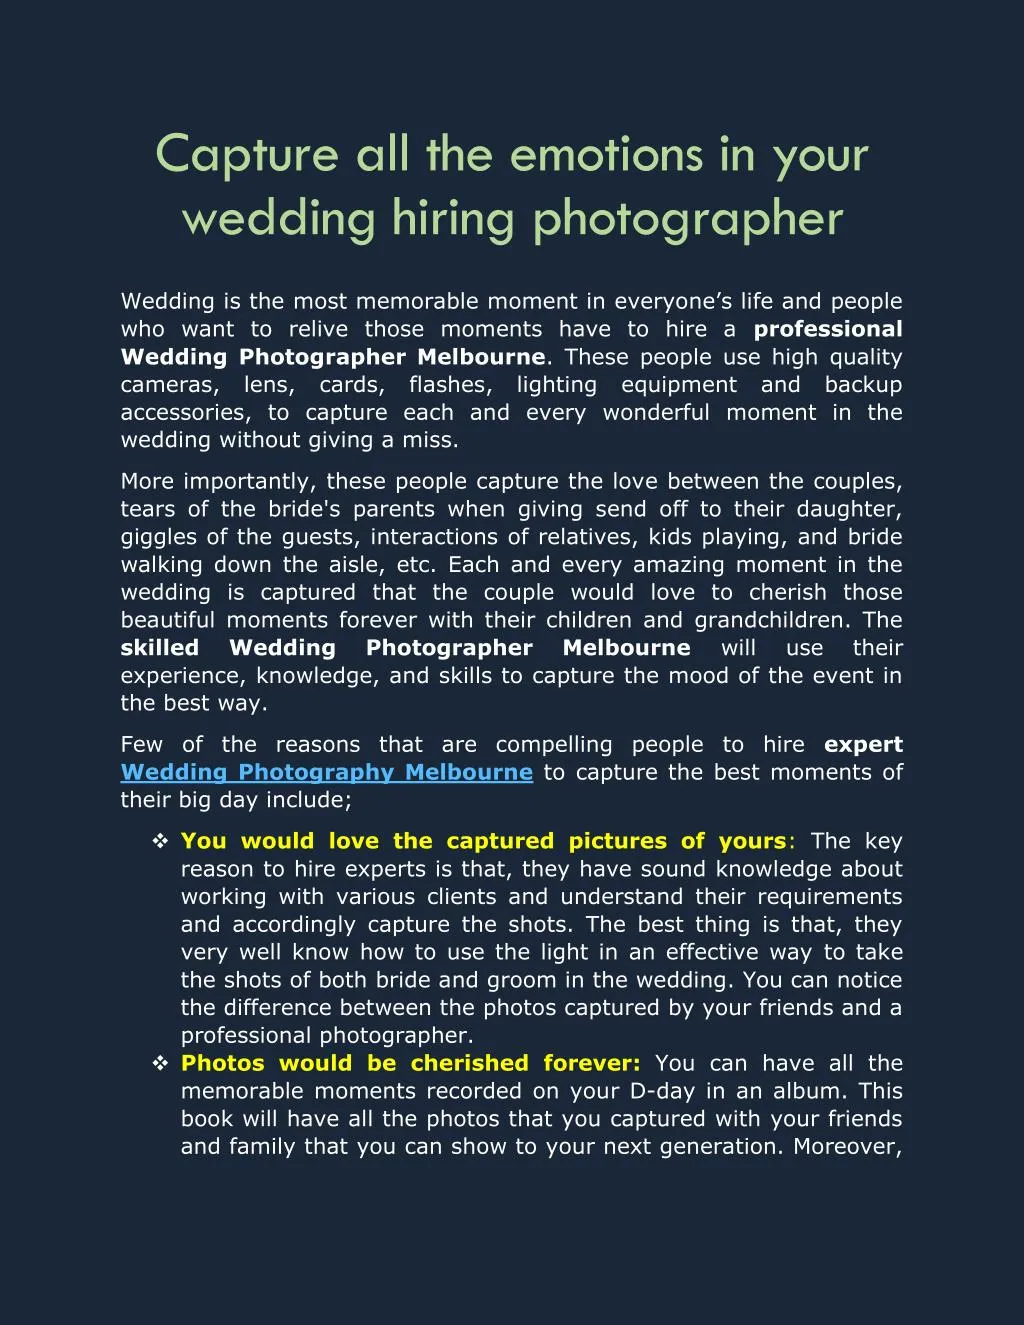 capture all the emotions in your wedding hiring